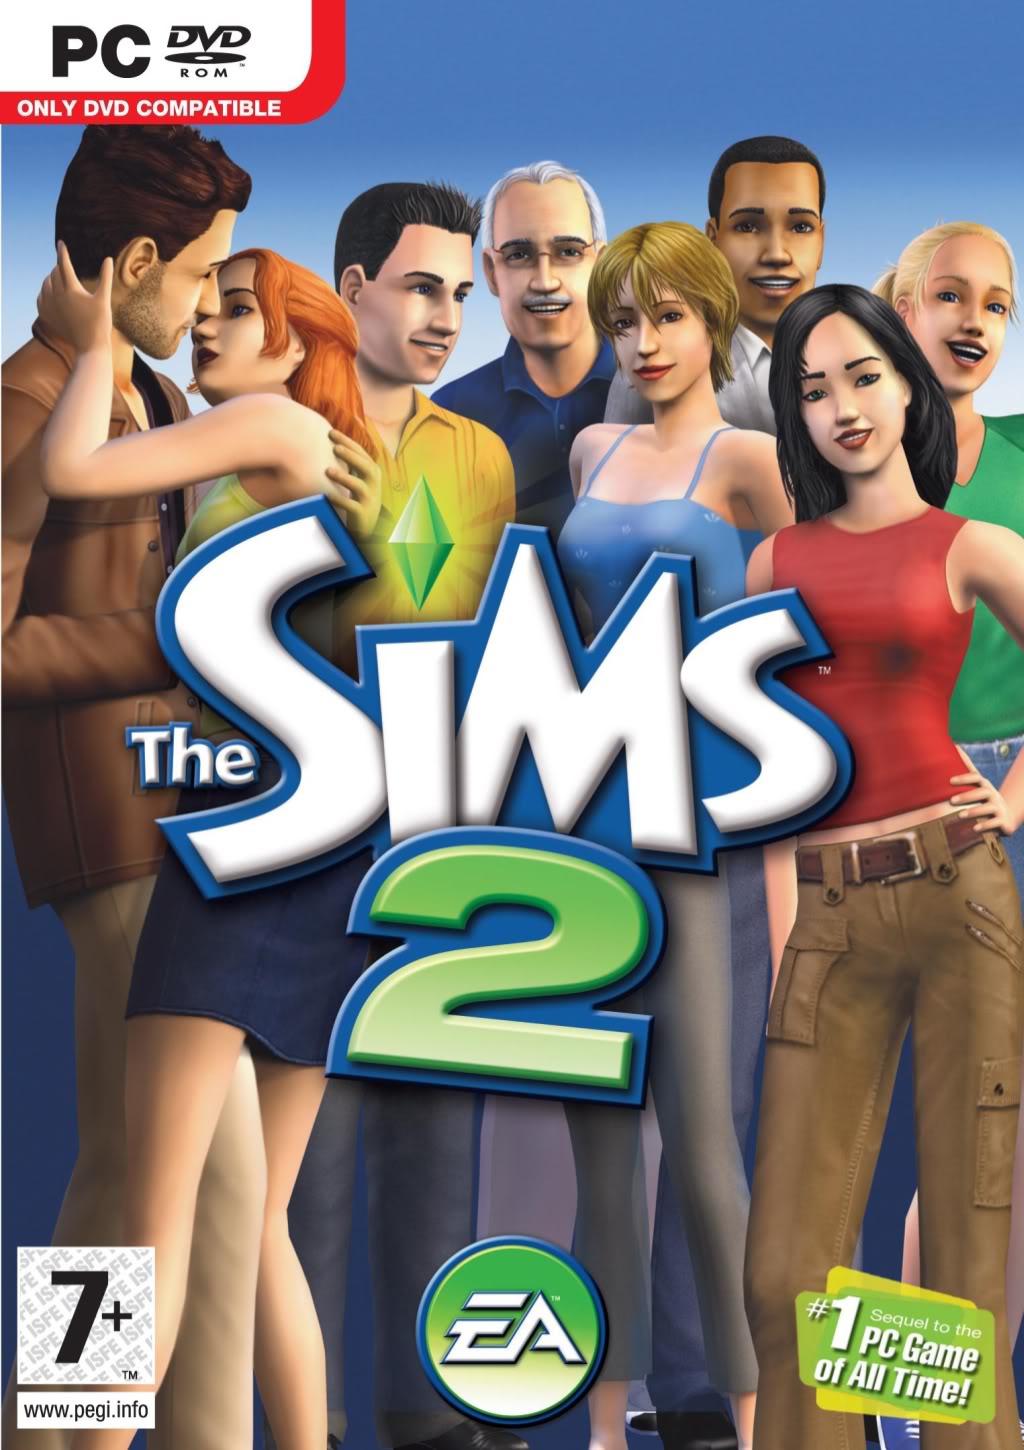 The Sims 2, The Sims Wiki